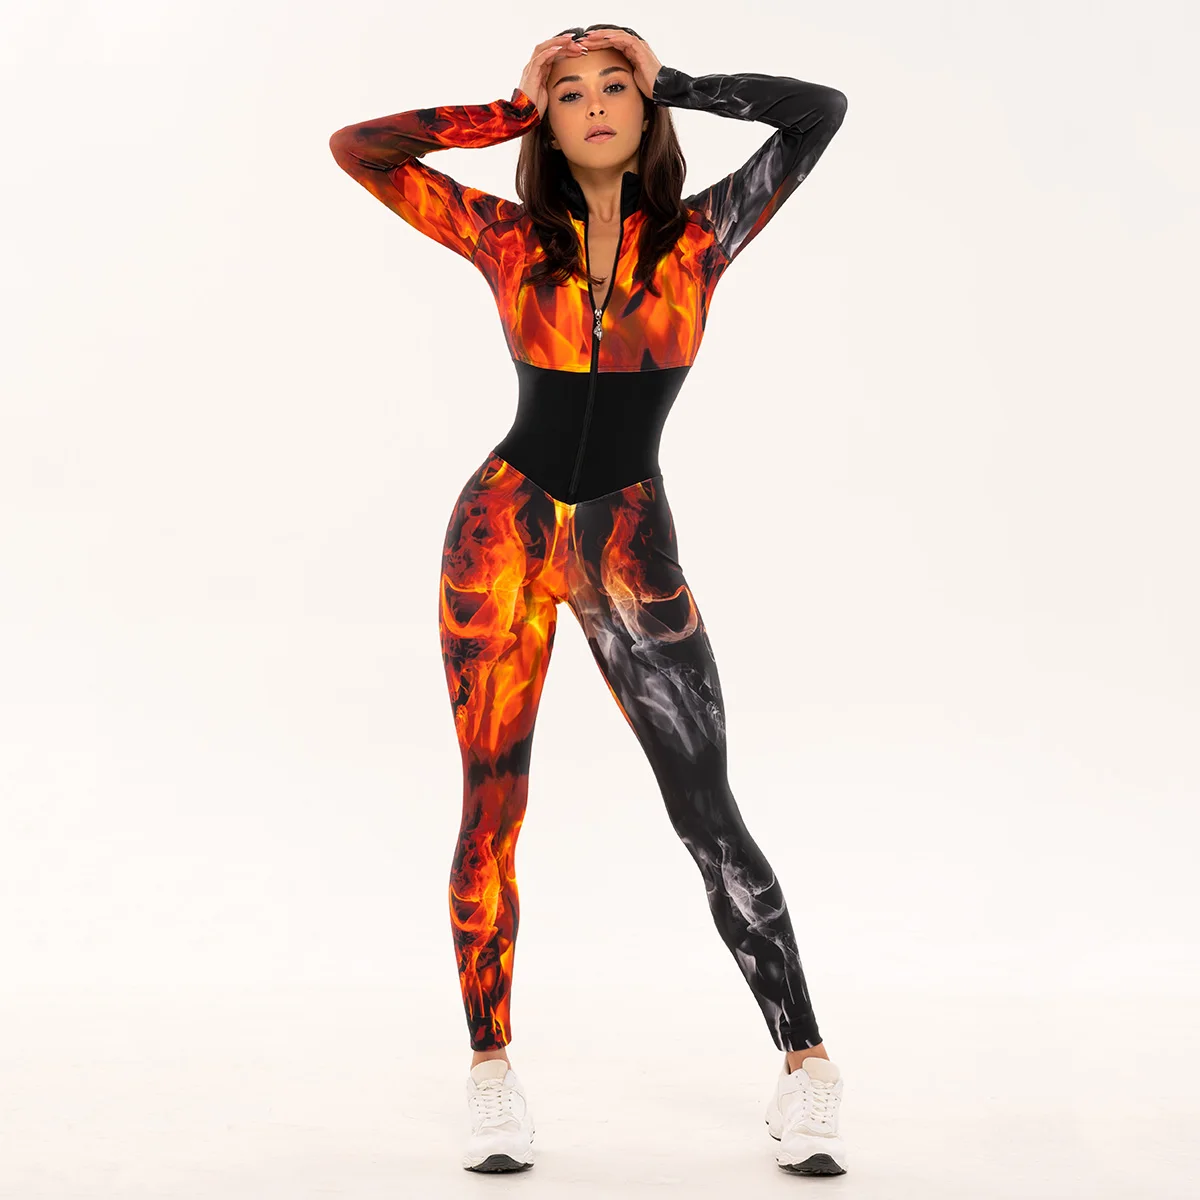 Oshoplive Fire Printed Long Sleeves Zipper Sports Jumpsuits For Women Sports Gym One Piece Jumpsuit